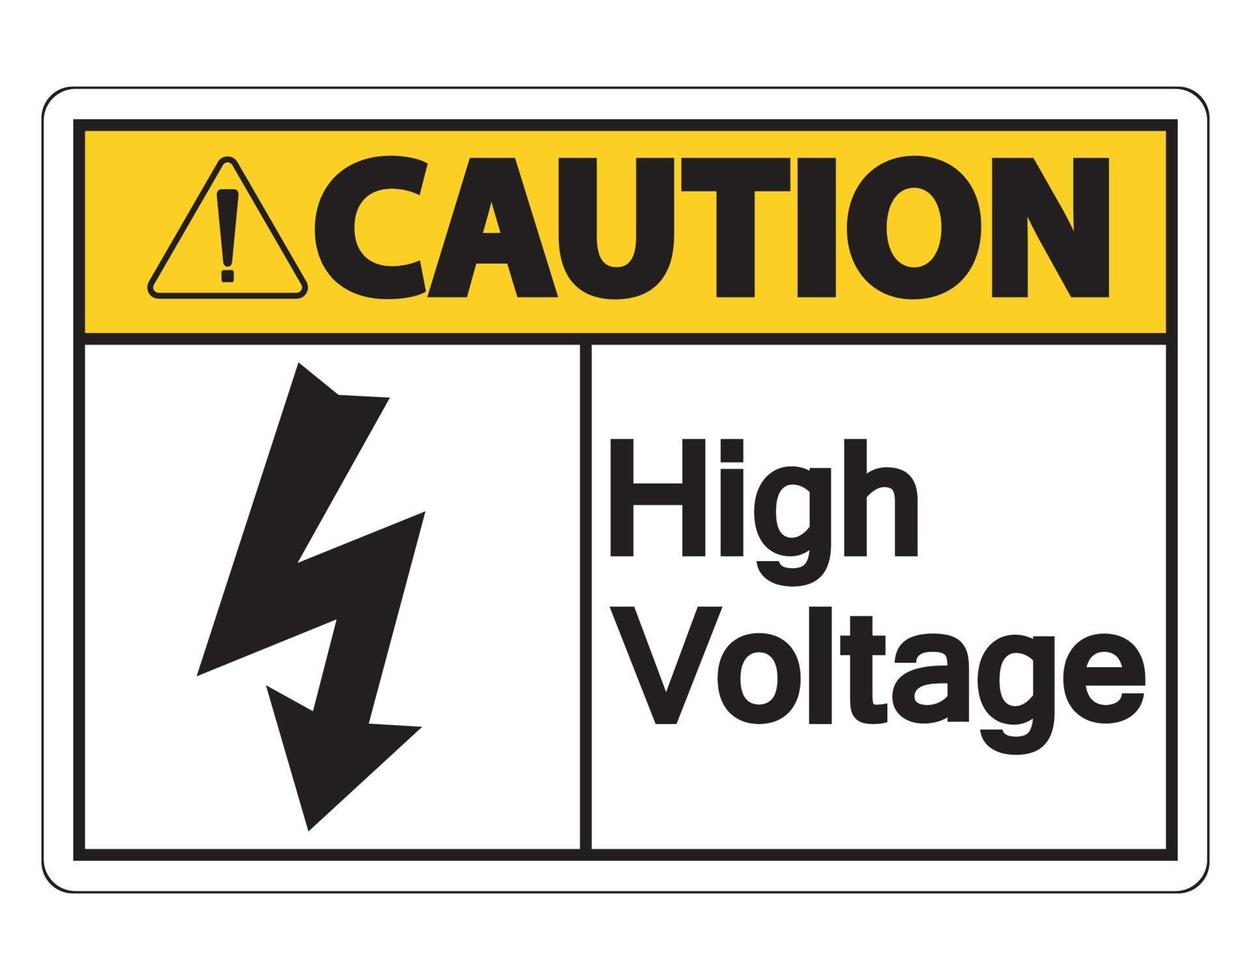 Caution high voltage sign on white background vector